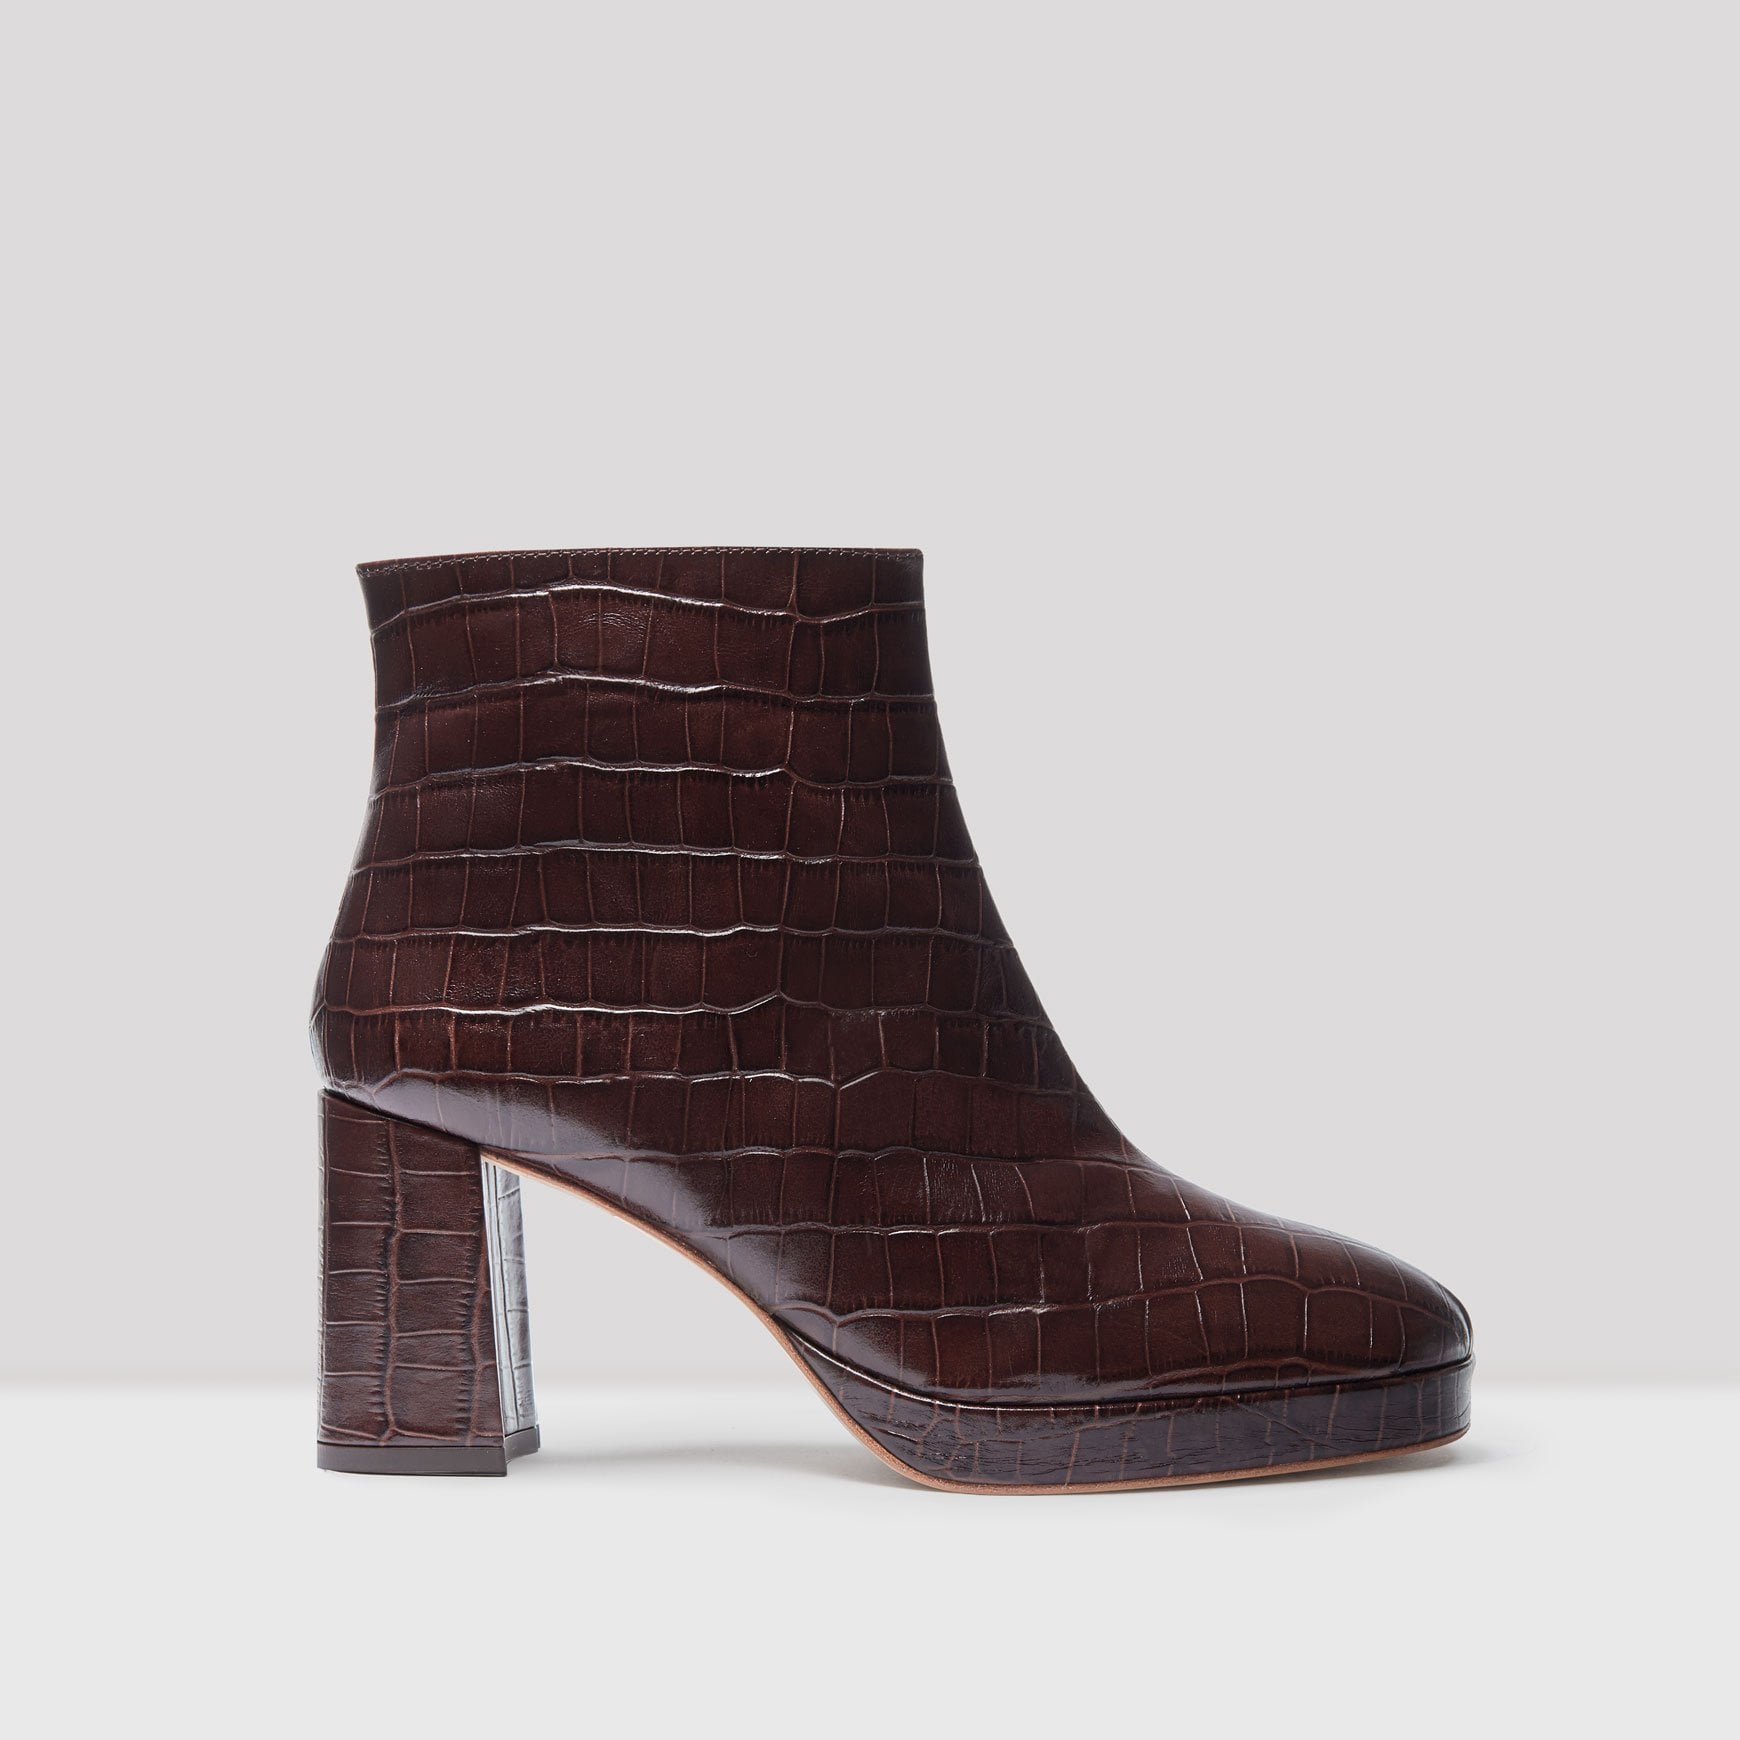 Miista Edith Mahogany Croc Leather Boots, 7 Stylish Outfit Formulas For  Curvy Shapes (Oh, and They're SO Easy to Wear)